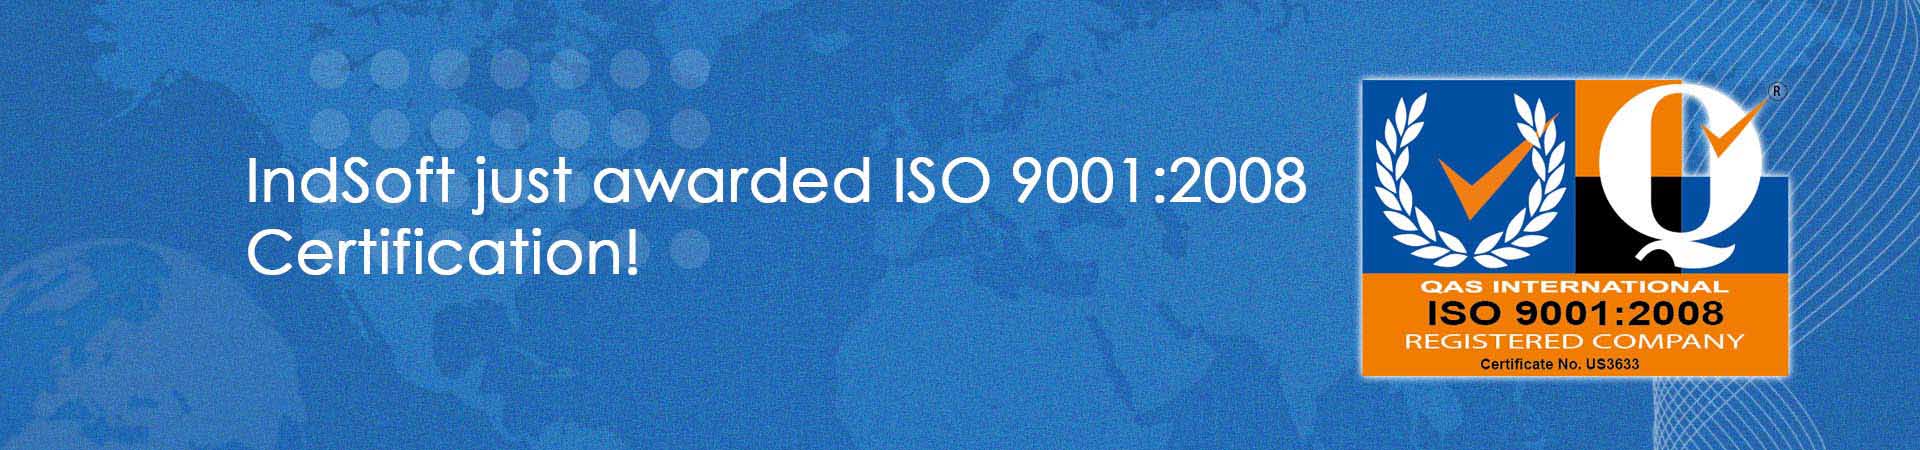 IndSoft just awarded ISO 9001:2008 Certification!